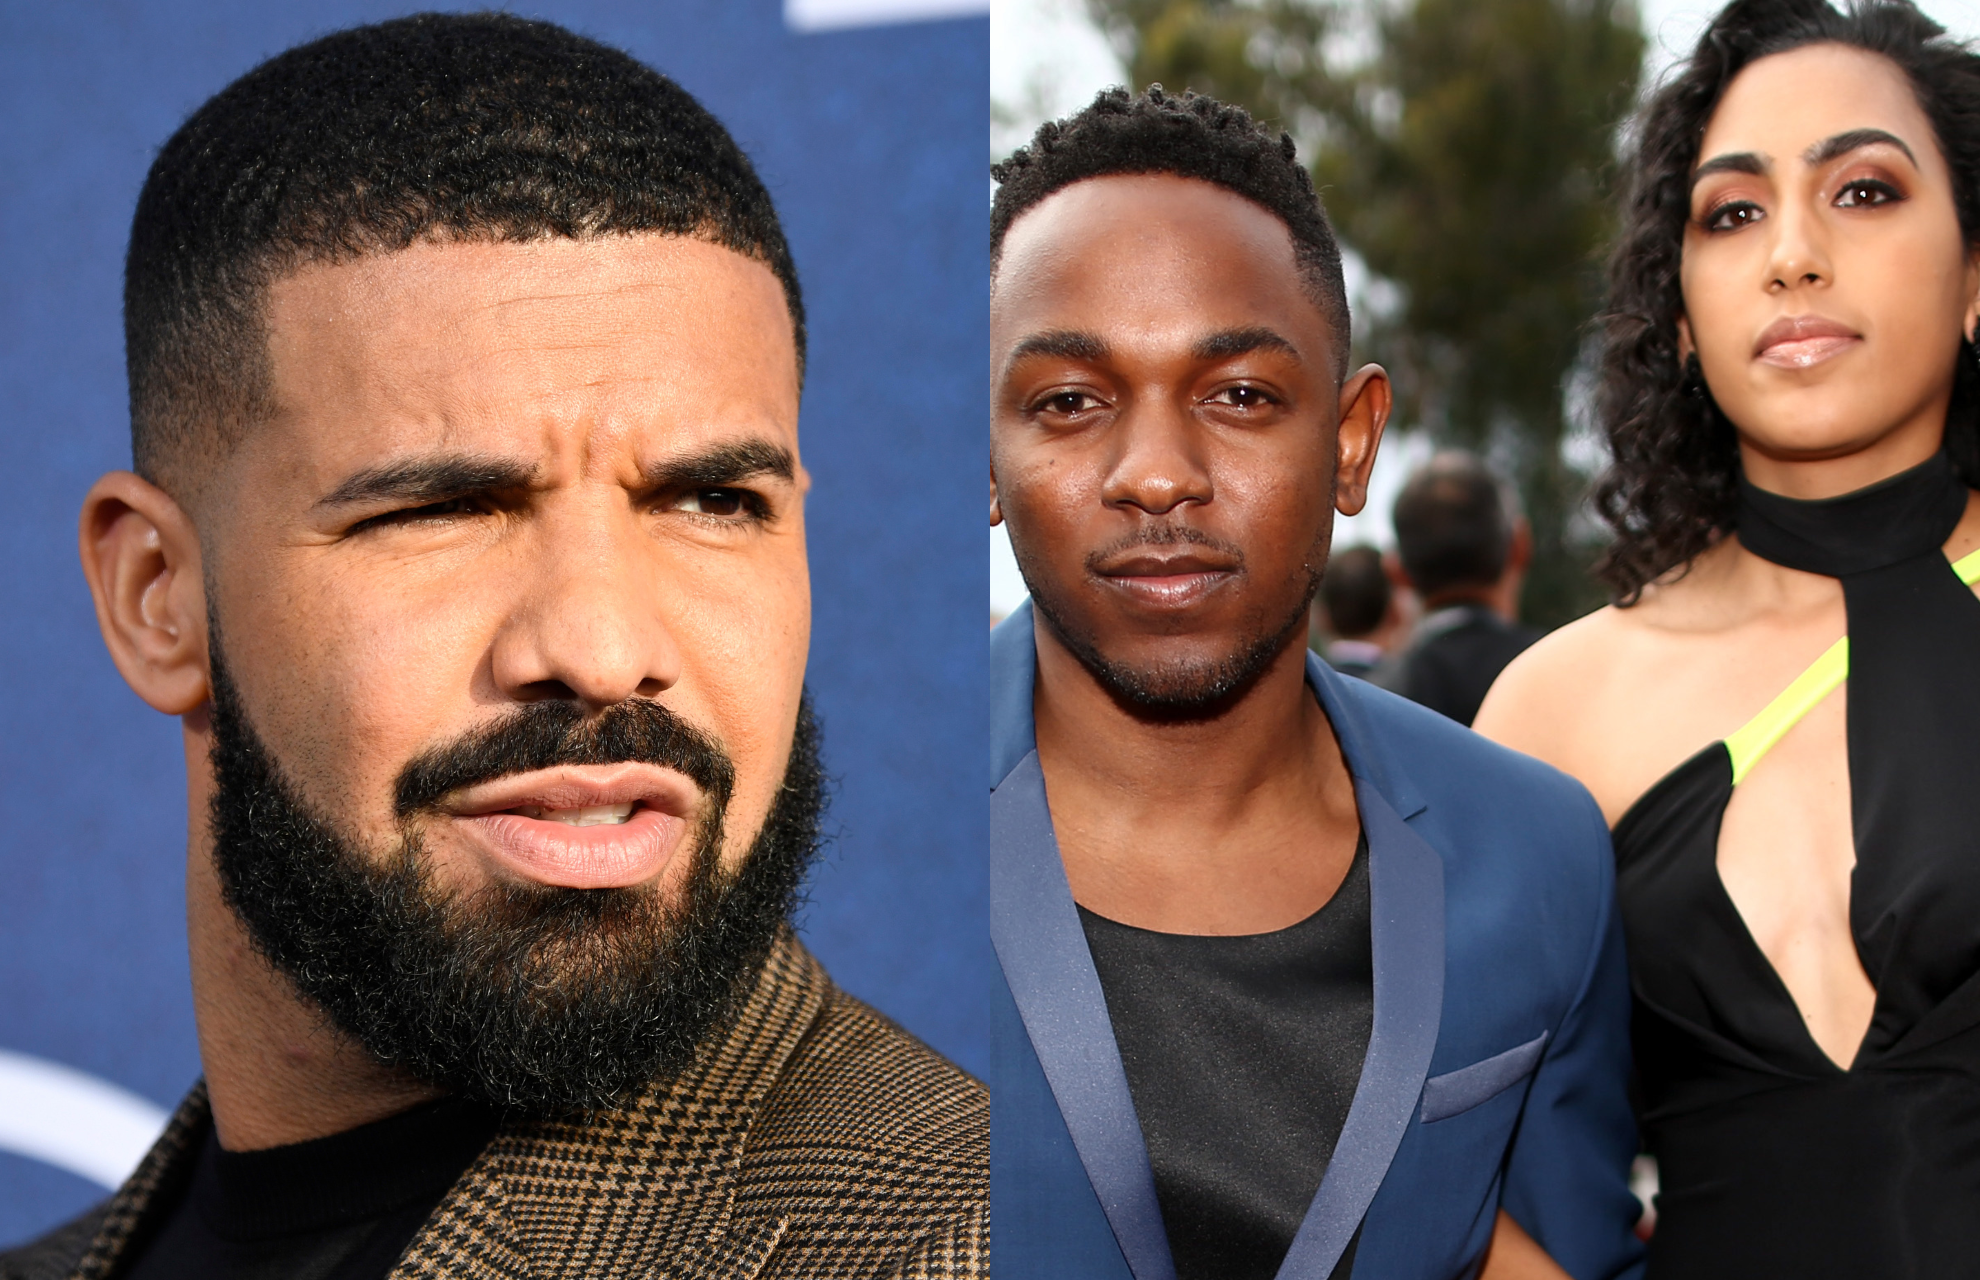 Drake Allegedly Paid Kendrick Lamar Associate $150K For Information On Fiancée Whitney Alford